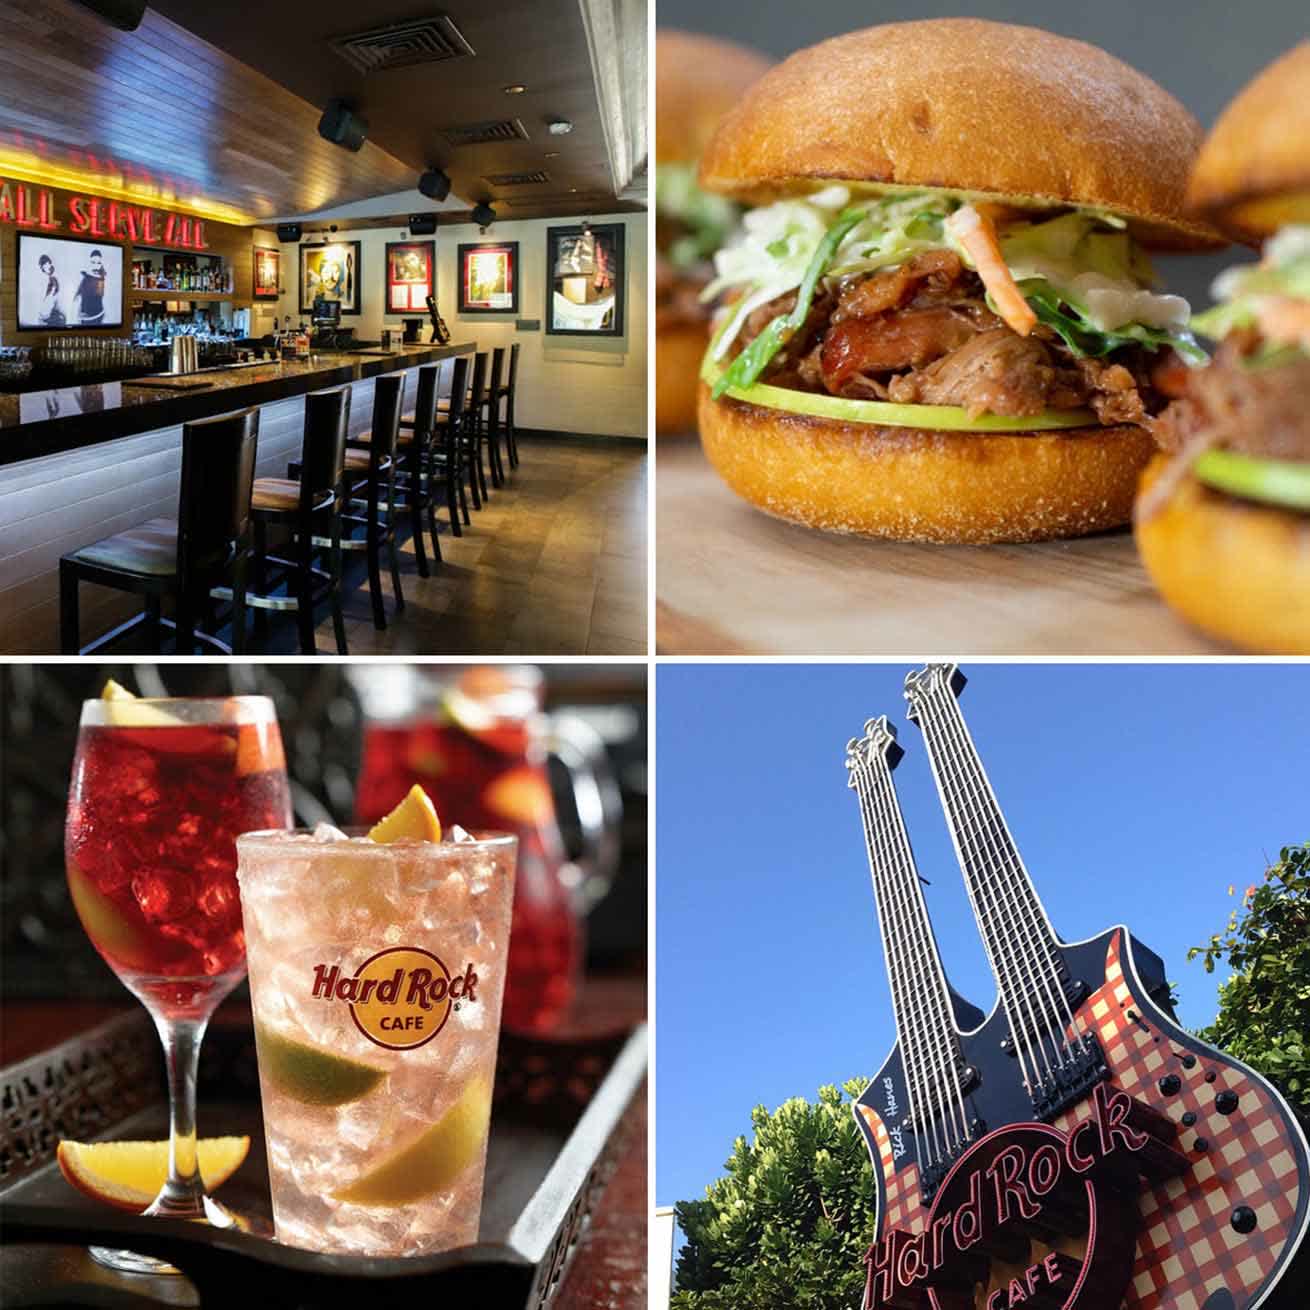 Burgers, drinks and interior of Hard Rock Cafe in Bali